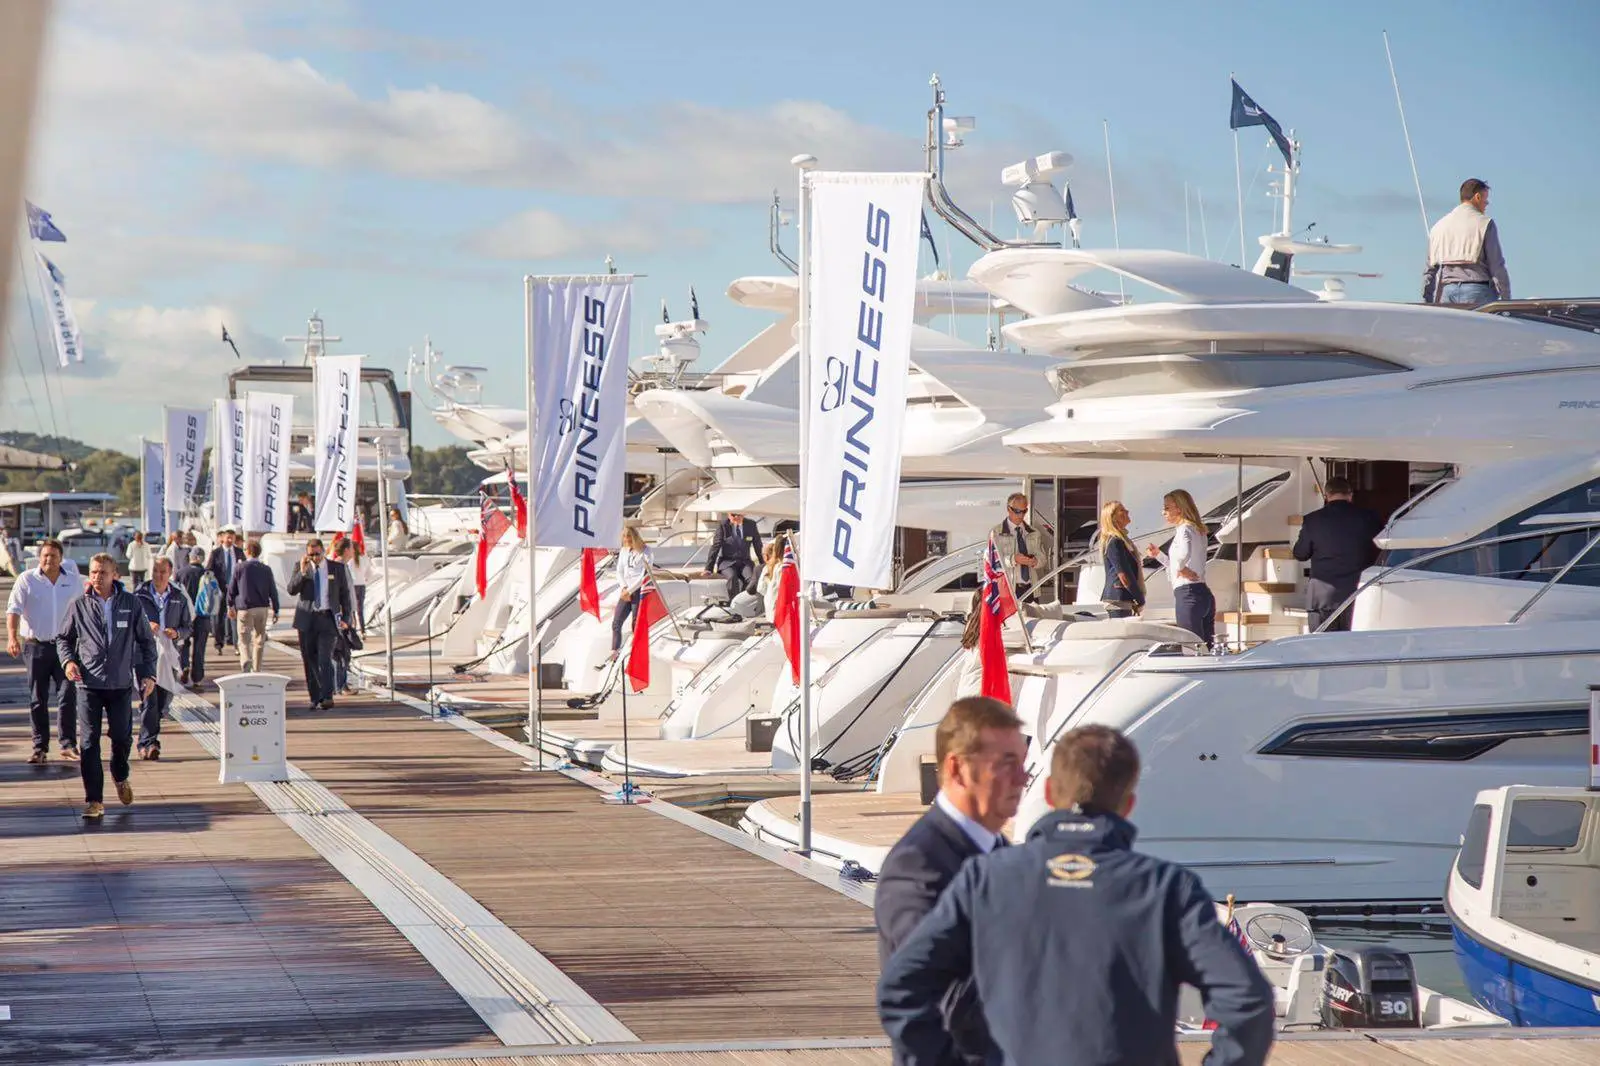 Featured image for “Southampton Boat Show 2021”